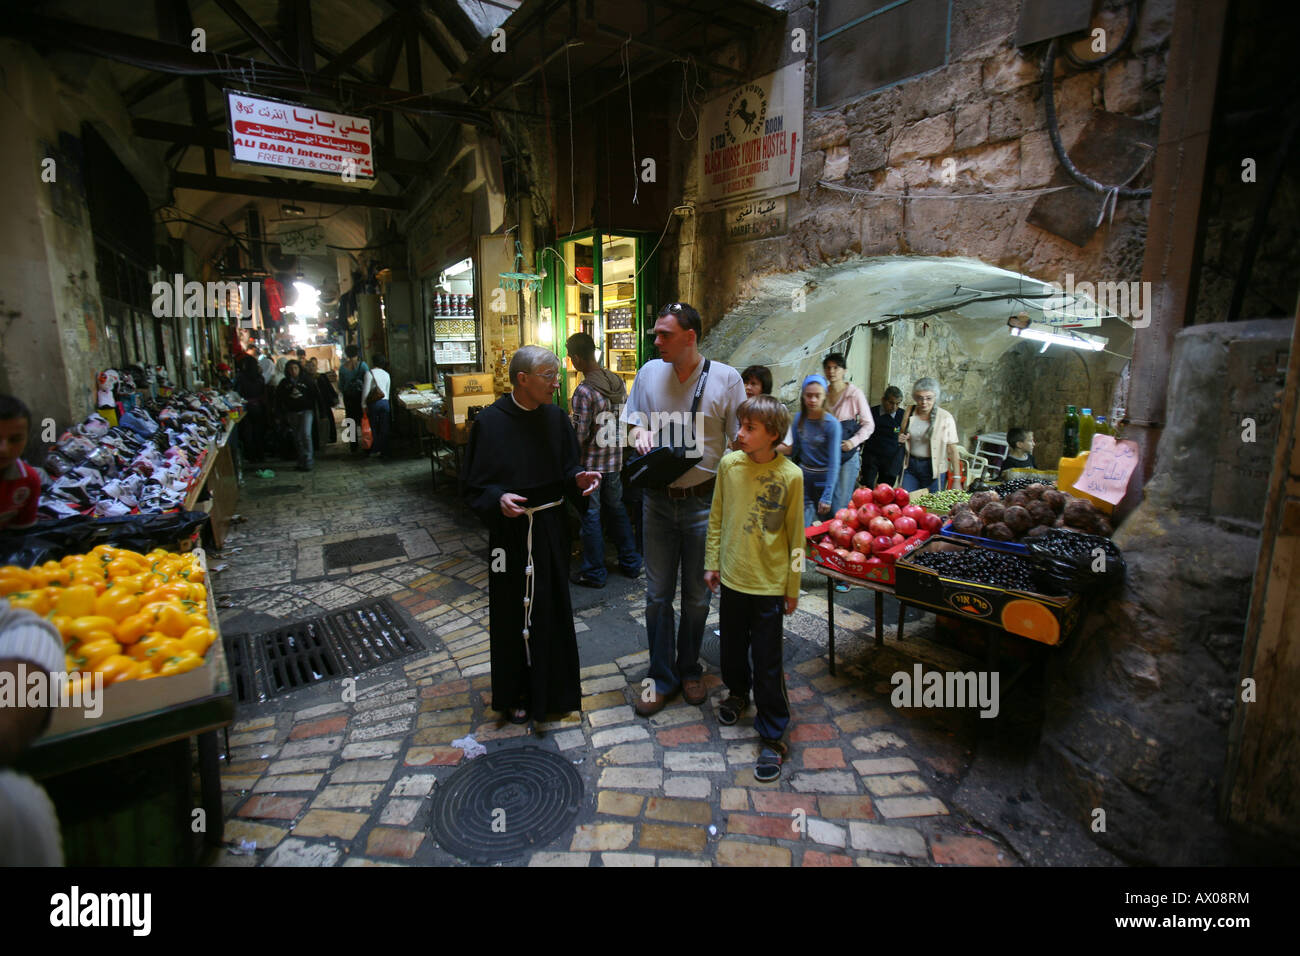 A clergyman talks to tourists at a market in the old city section of Jerusalem Stock Photo